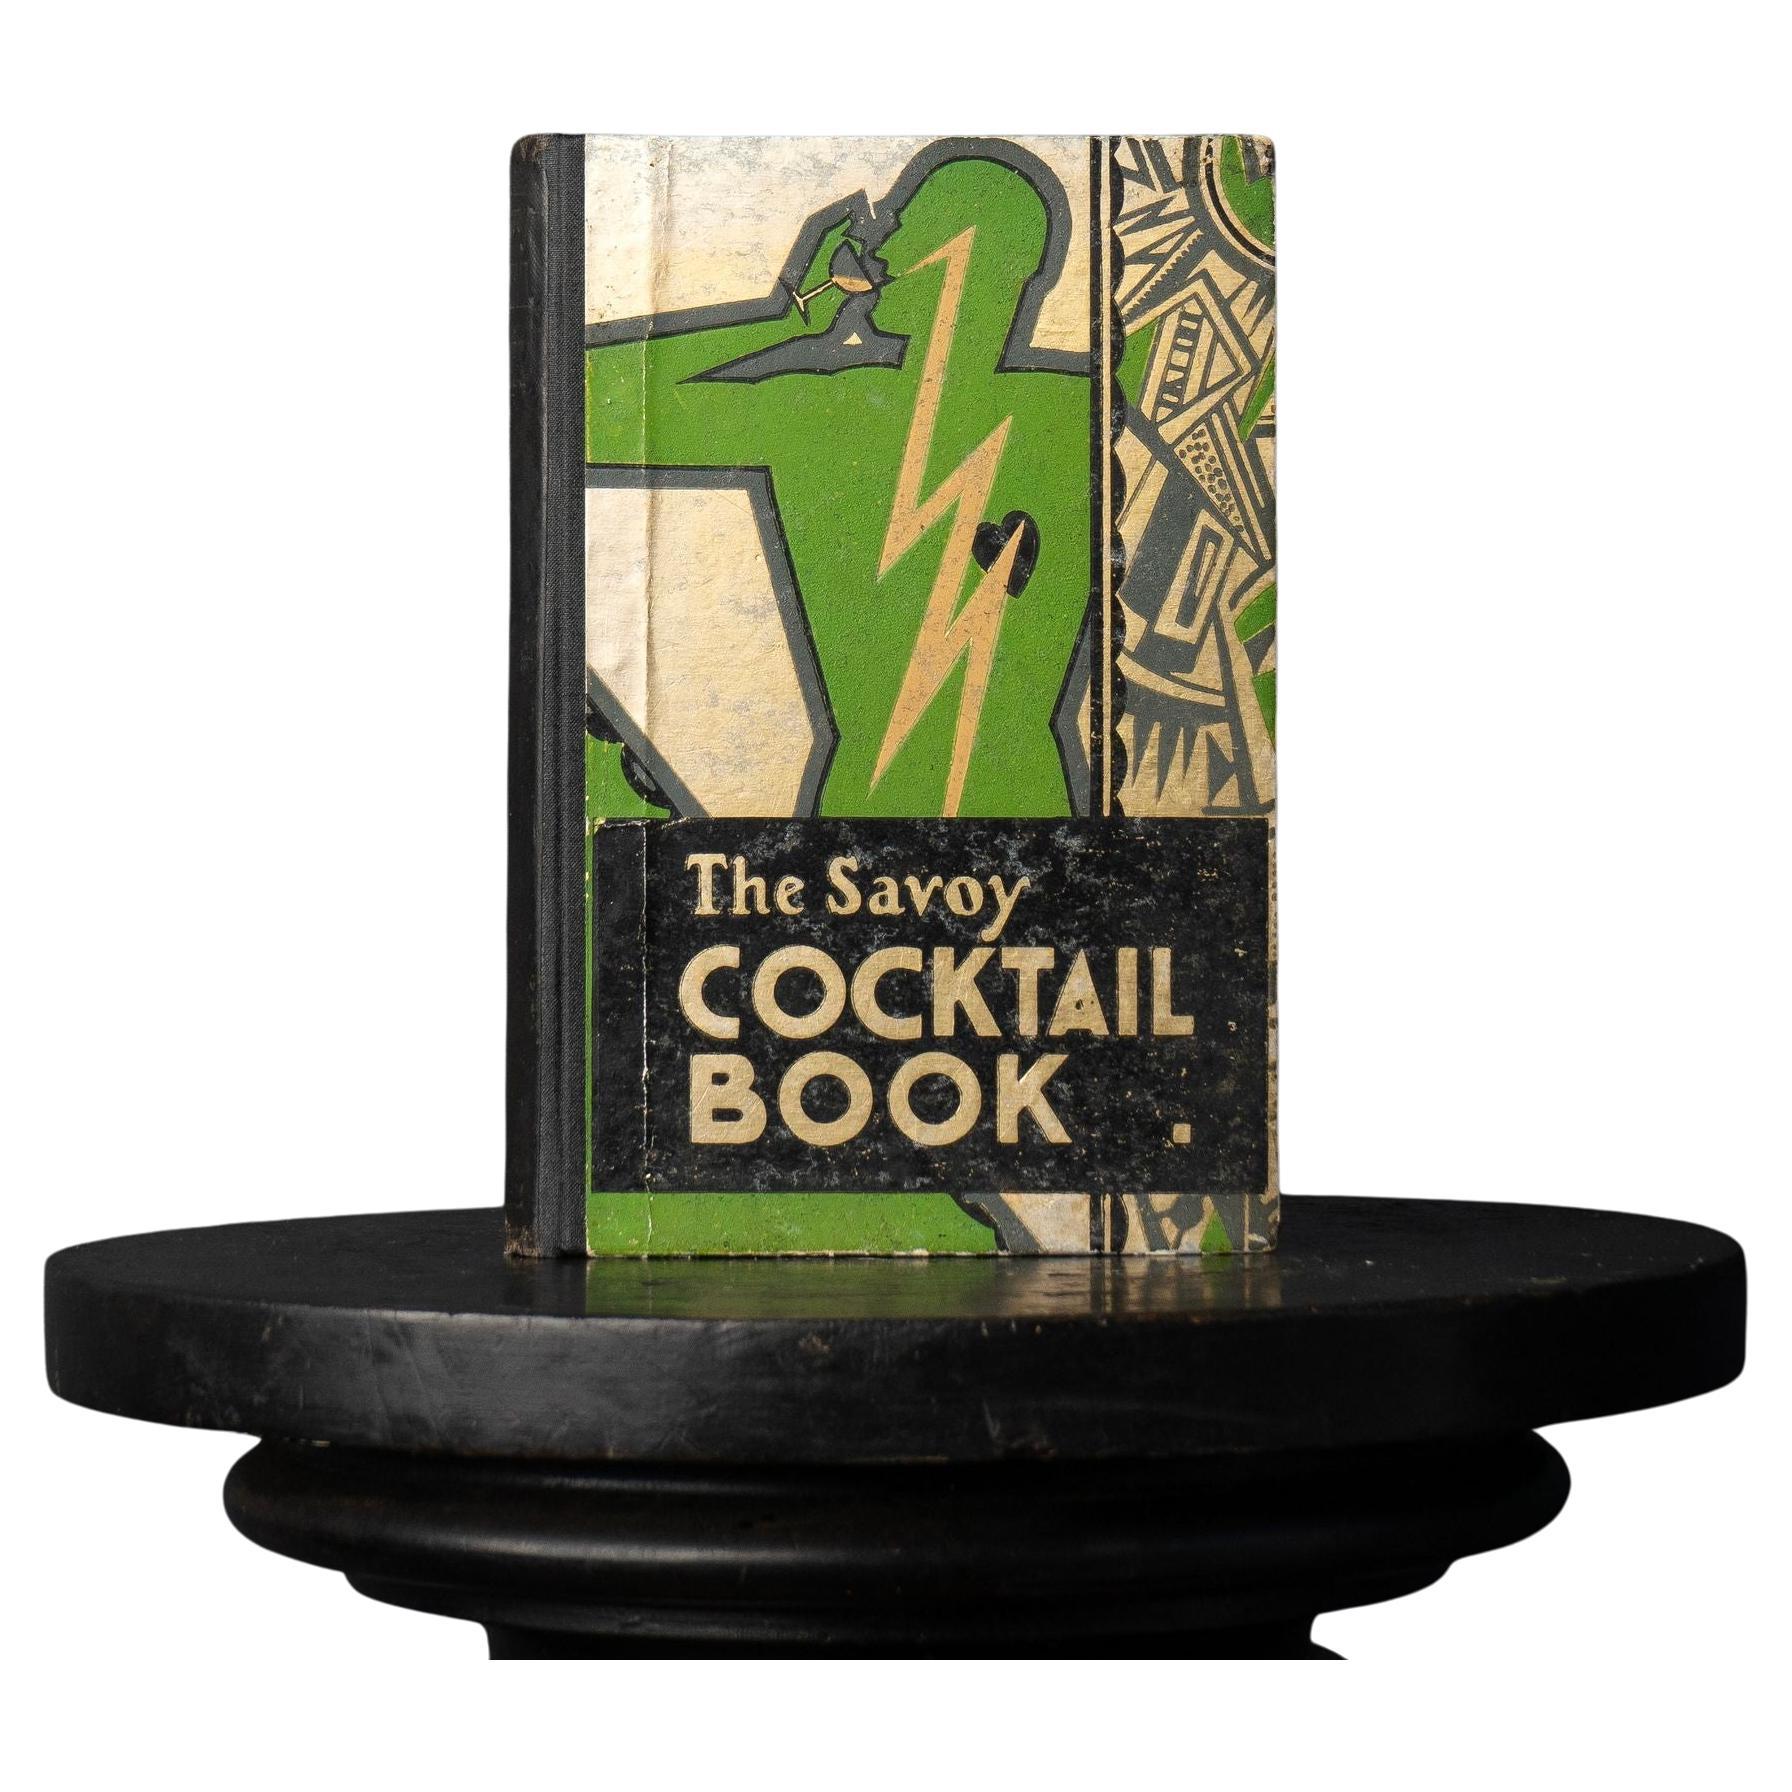 The savoy cocktail book by harry craddock, first edition 1930